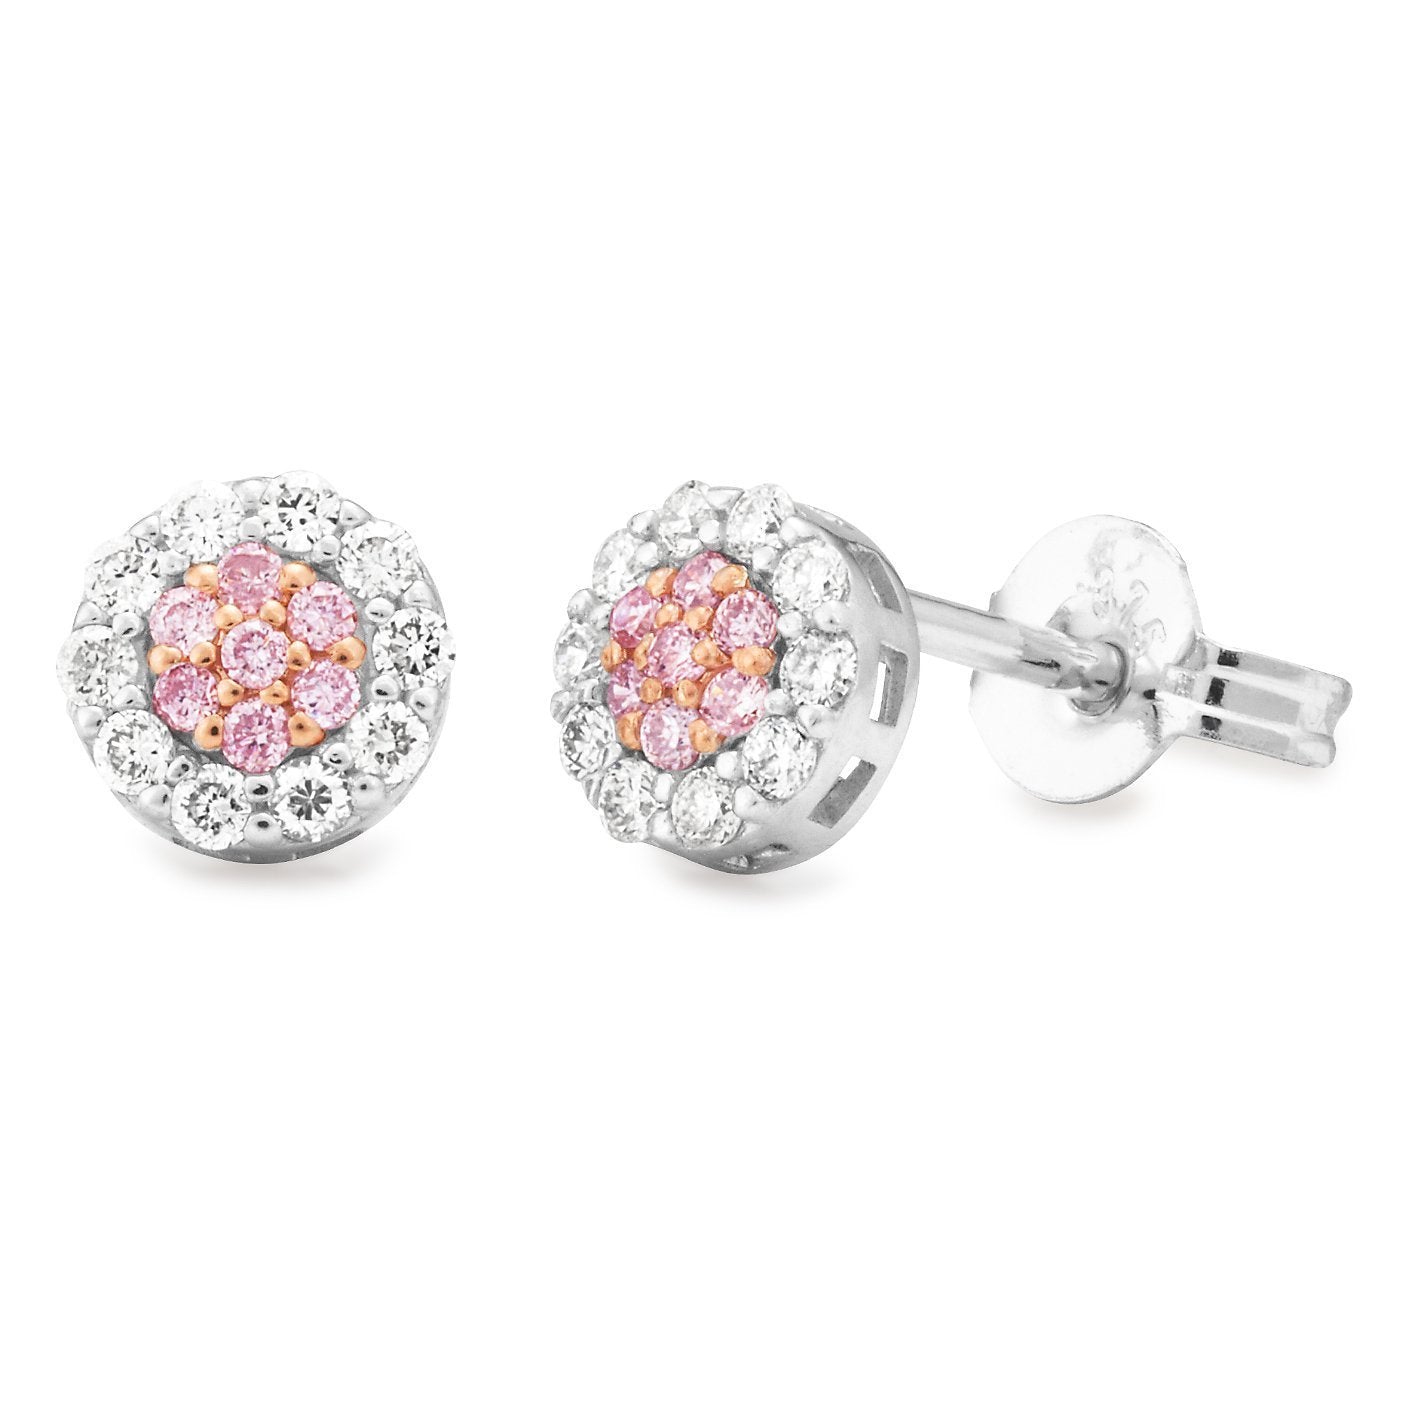 PINK CAVIAR 0.23ct Pink Diamond Earrings in 9ct White & Rose Gold